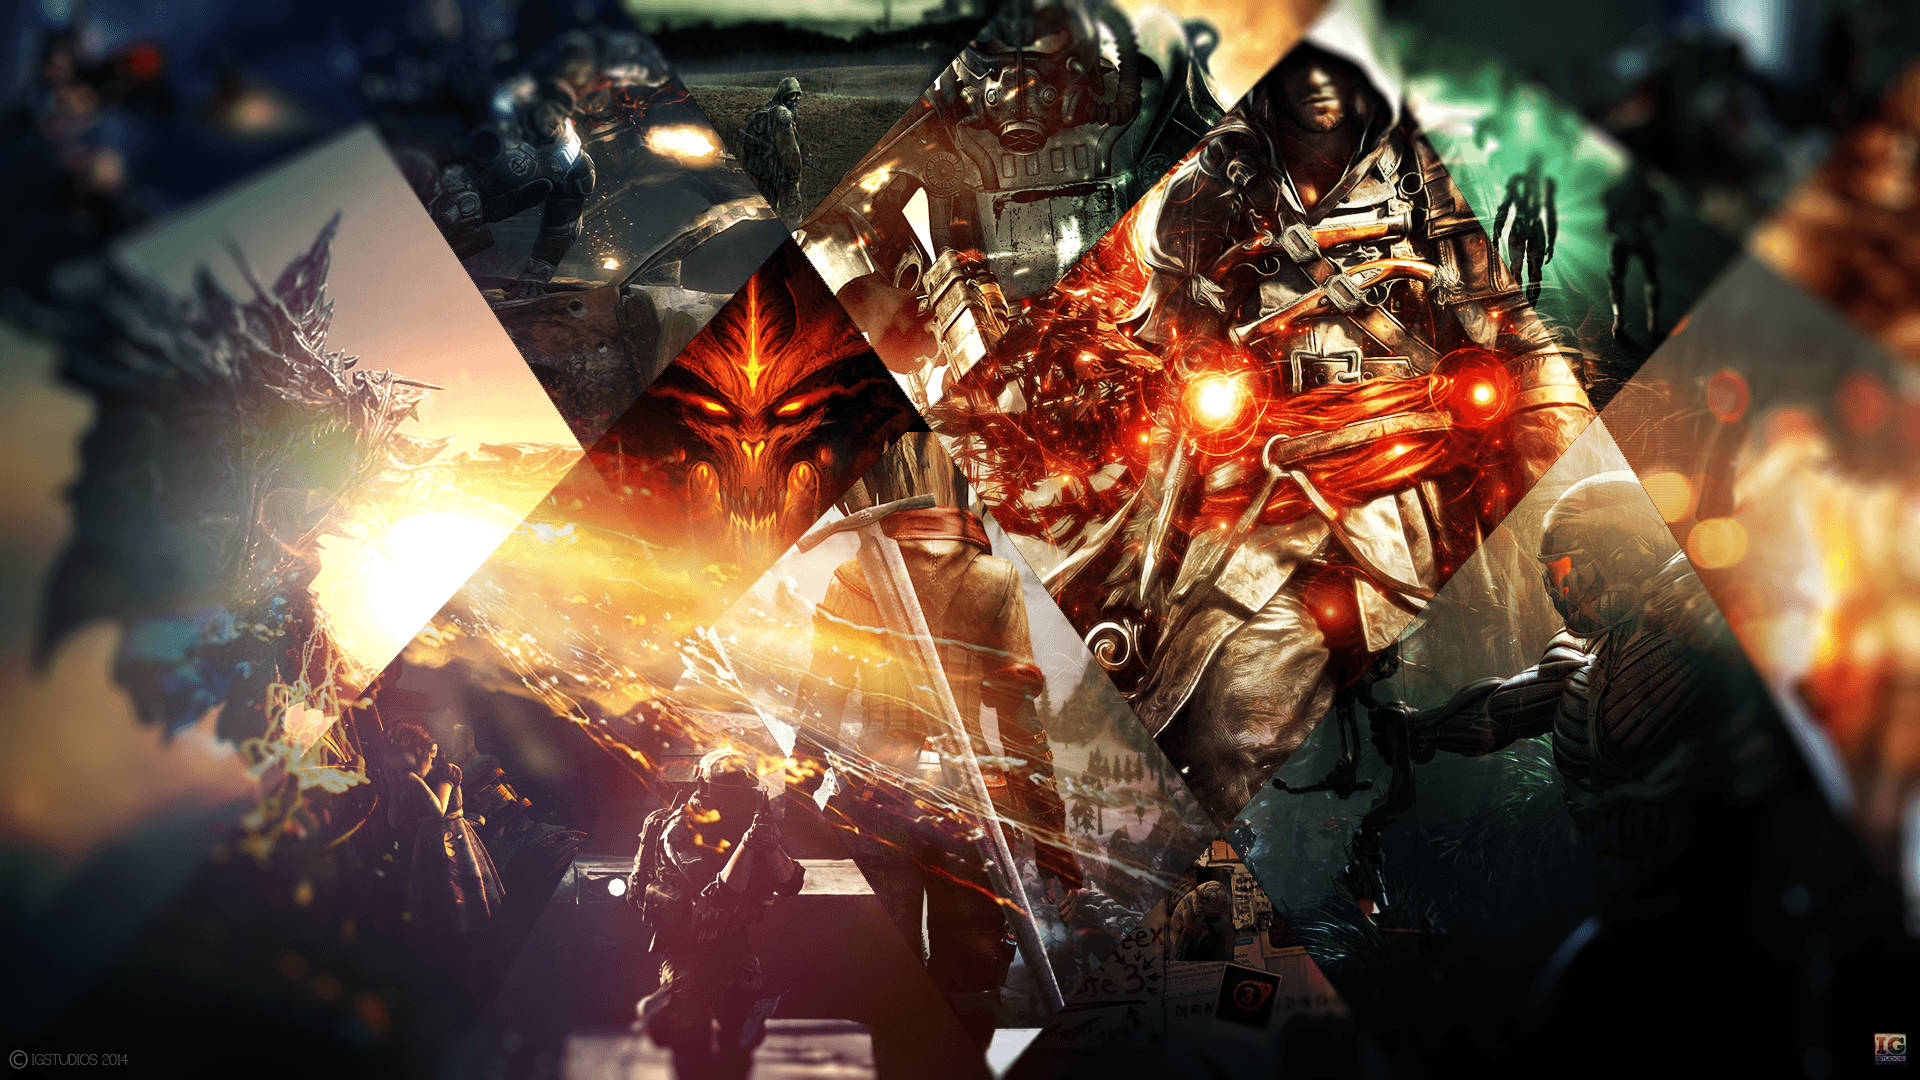 Get ready for an epic gaming experience! Wallpaper